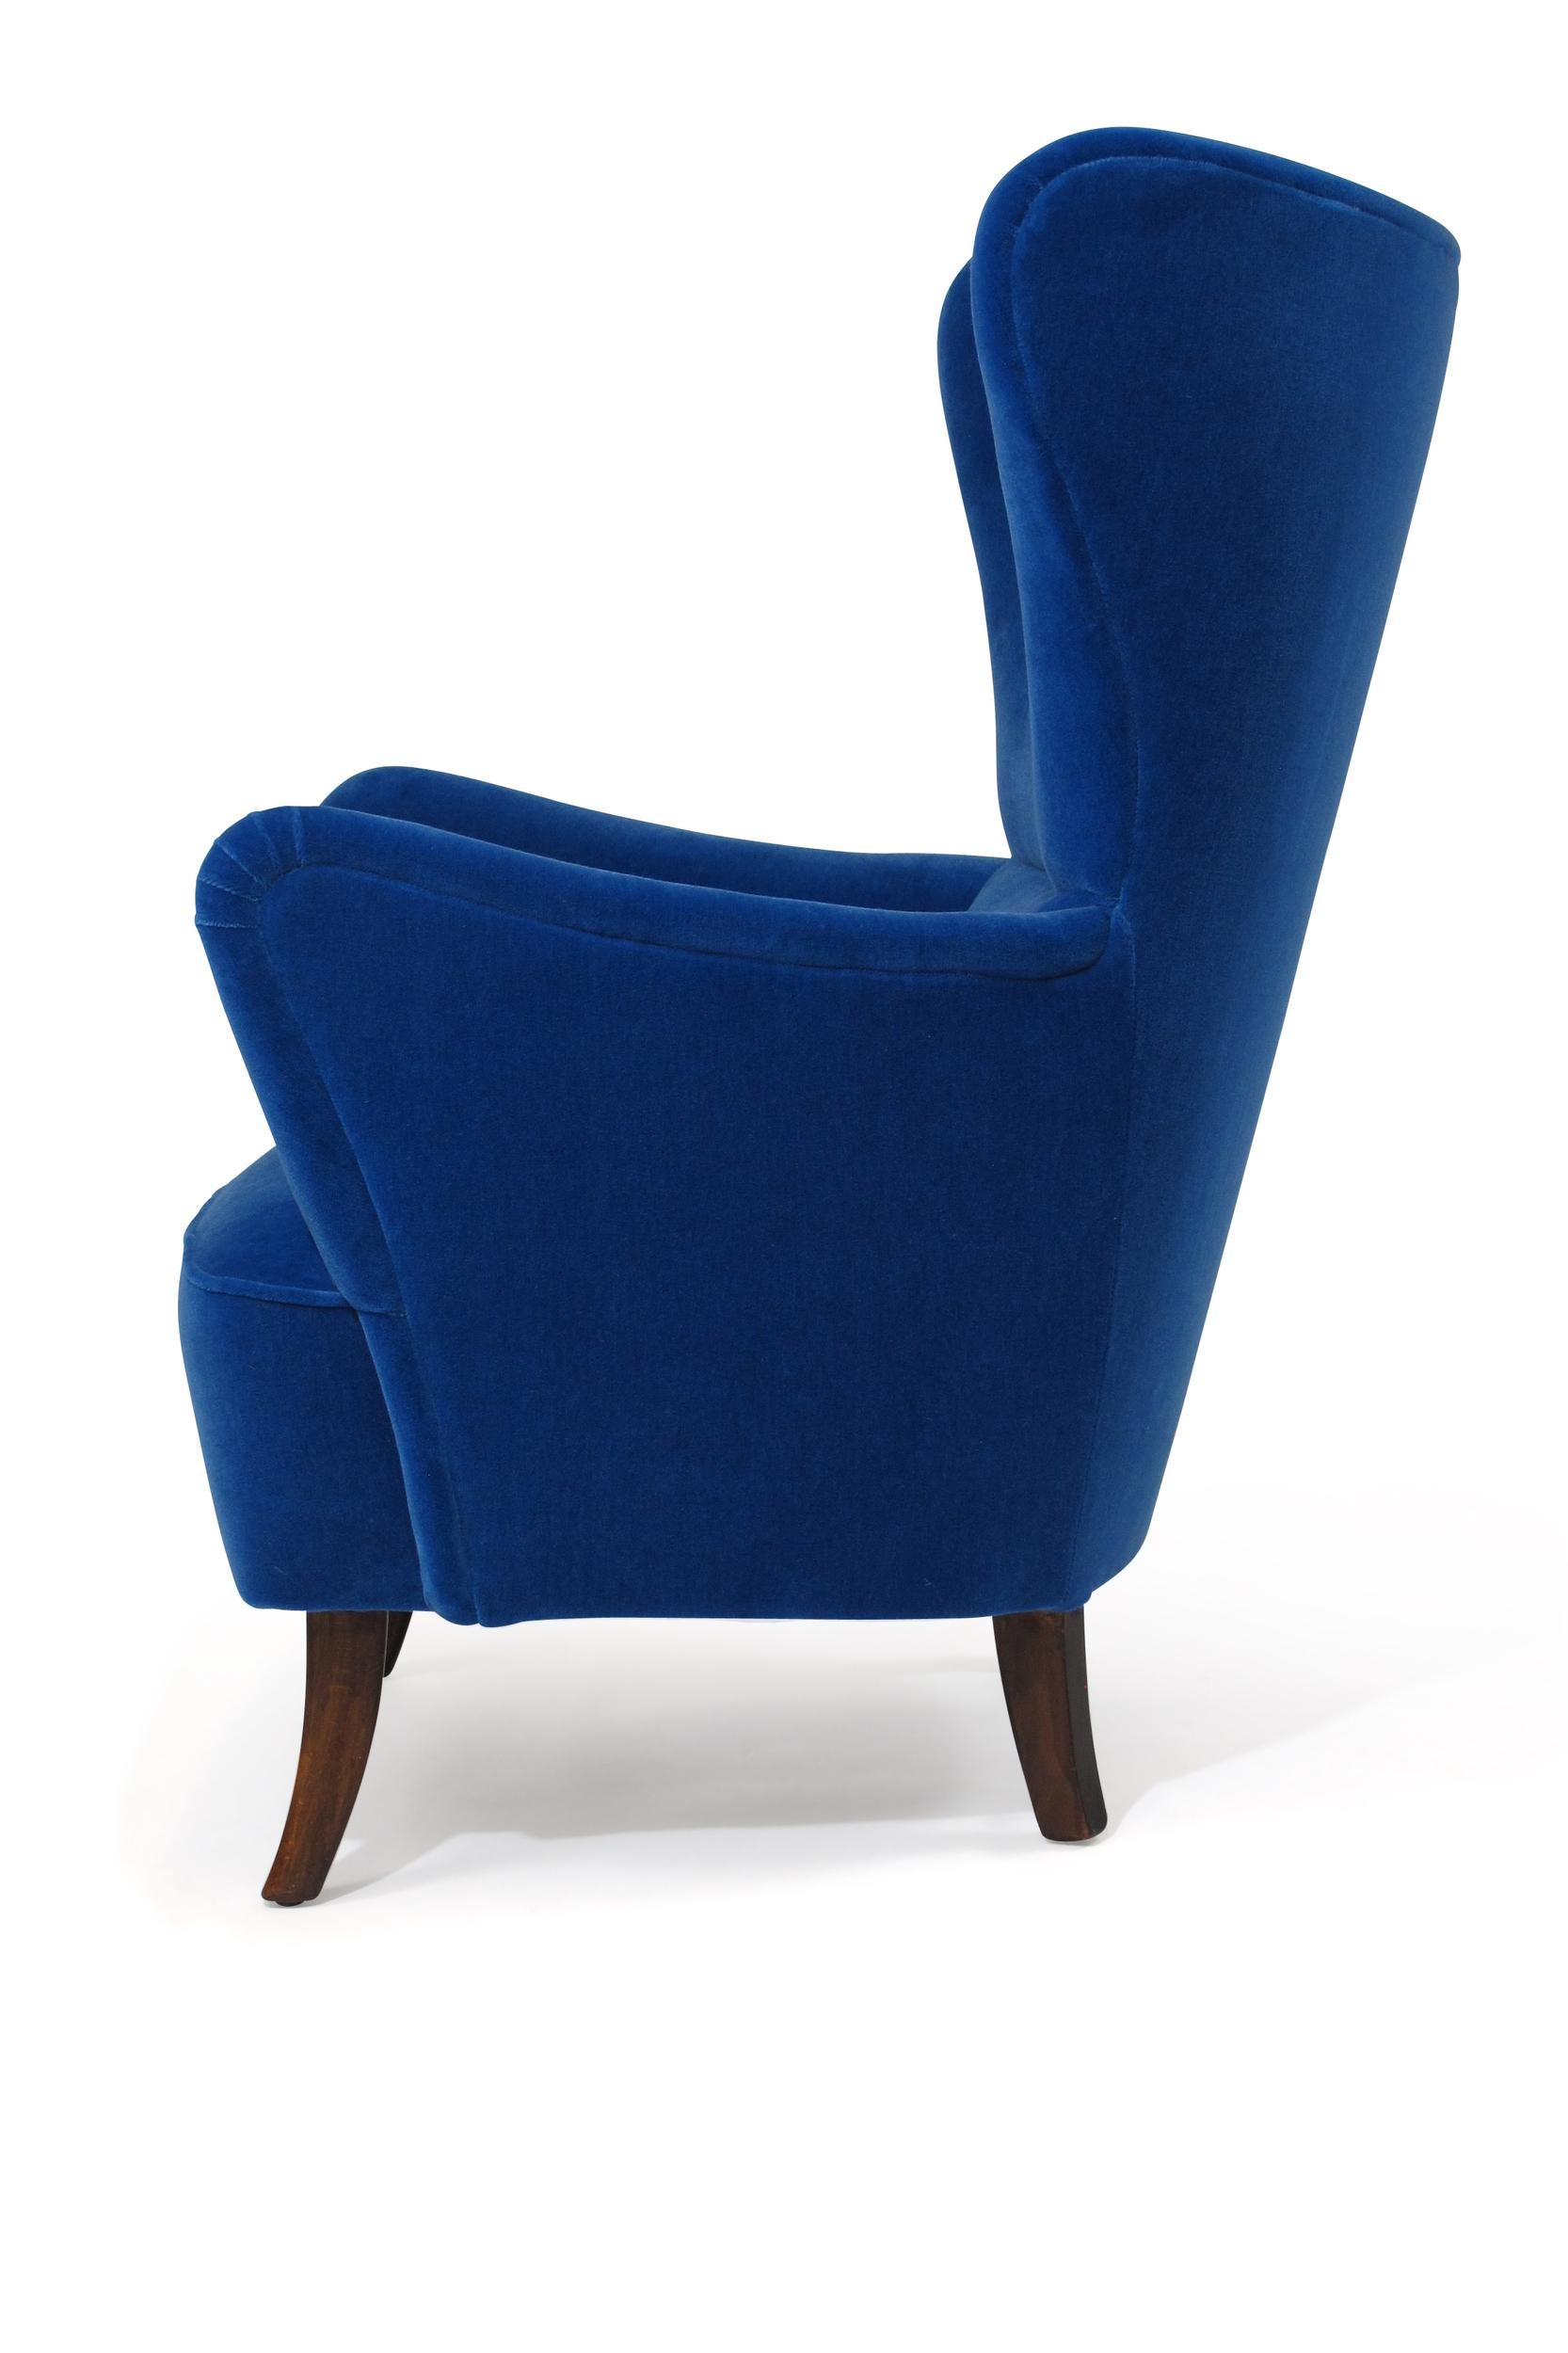 Danish 1950s Highback Lounge Chair in Blue Mohair